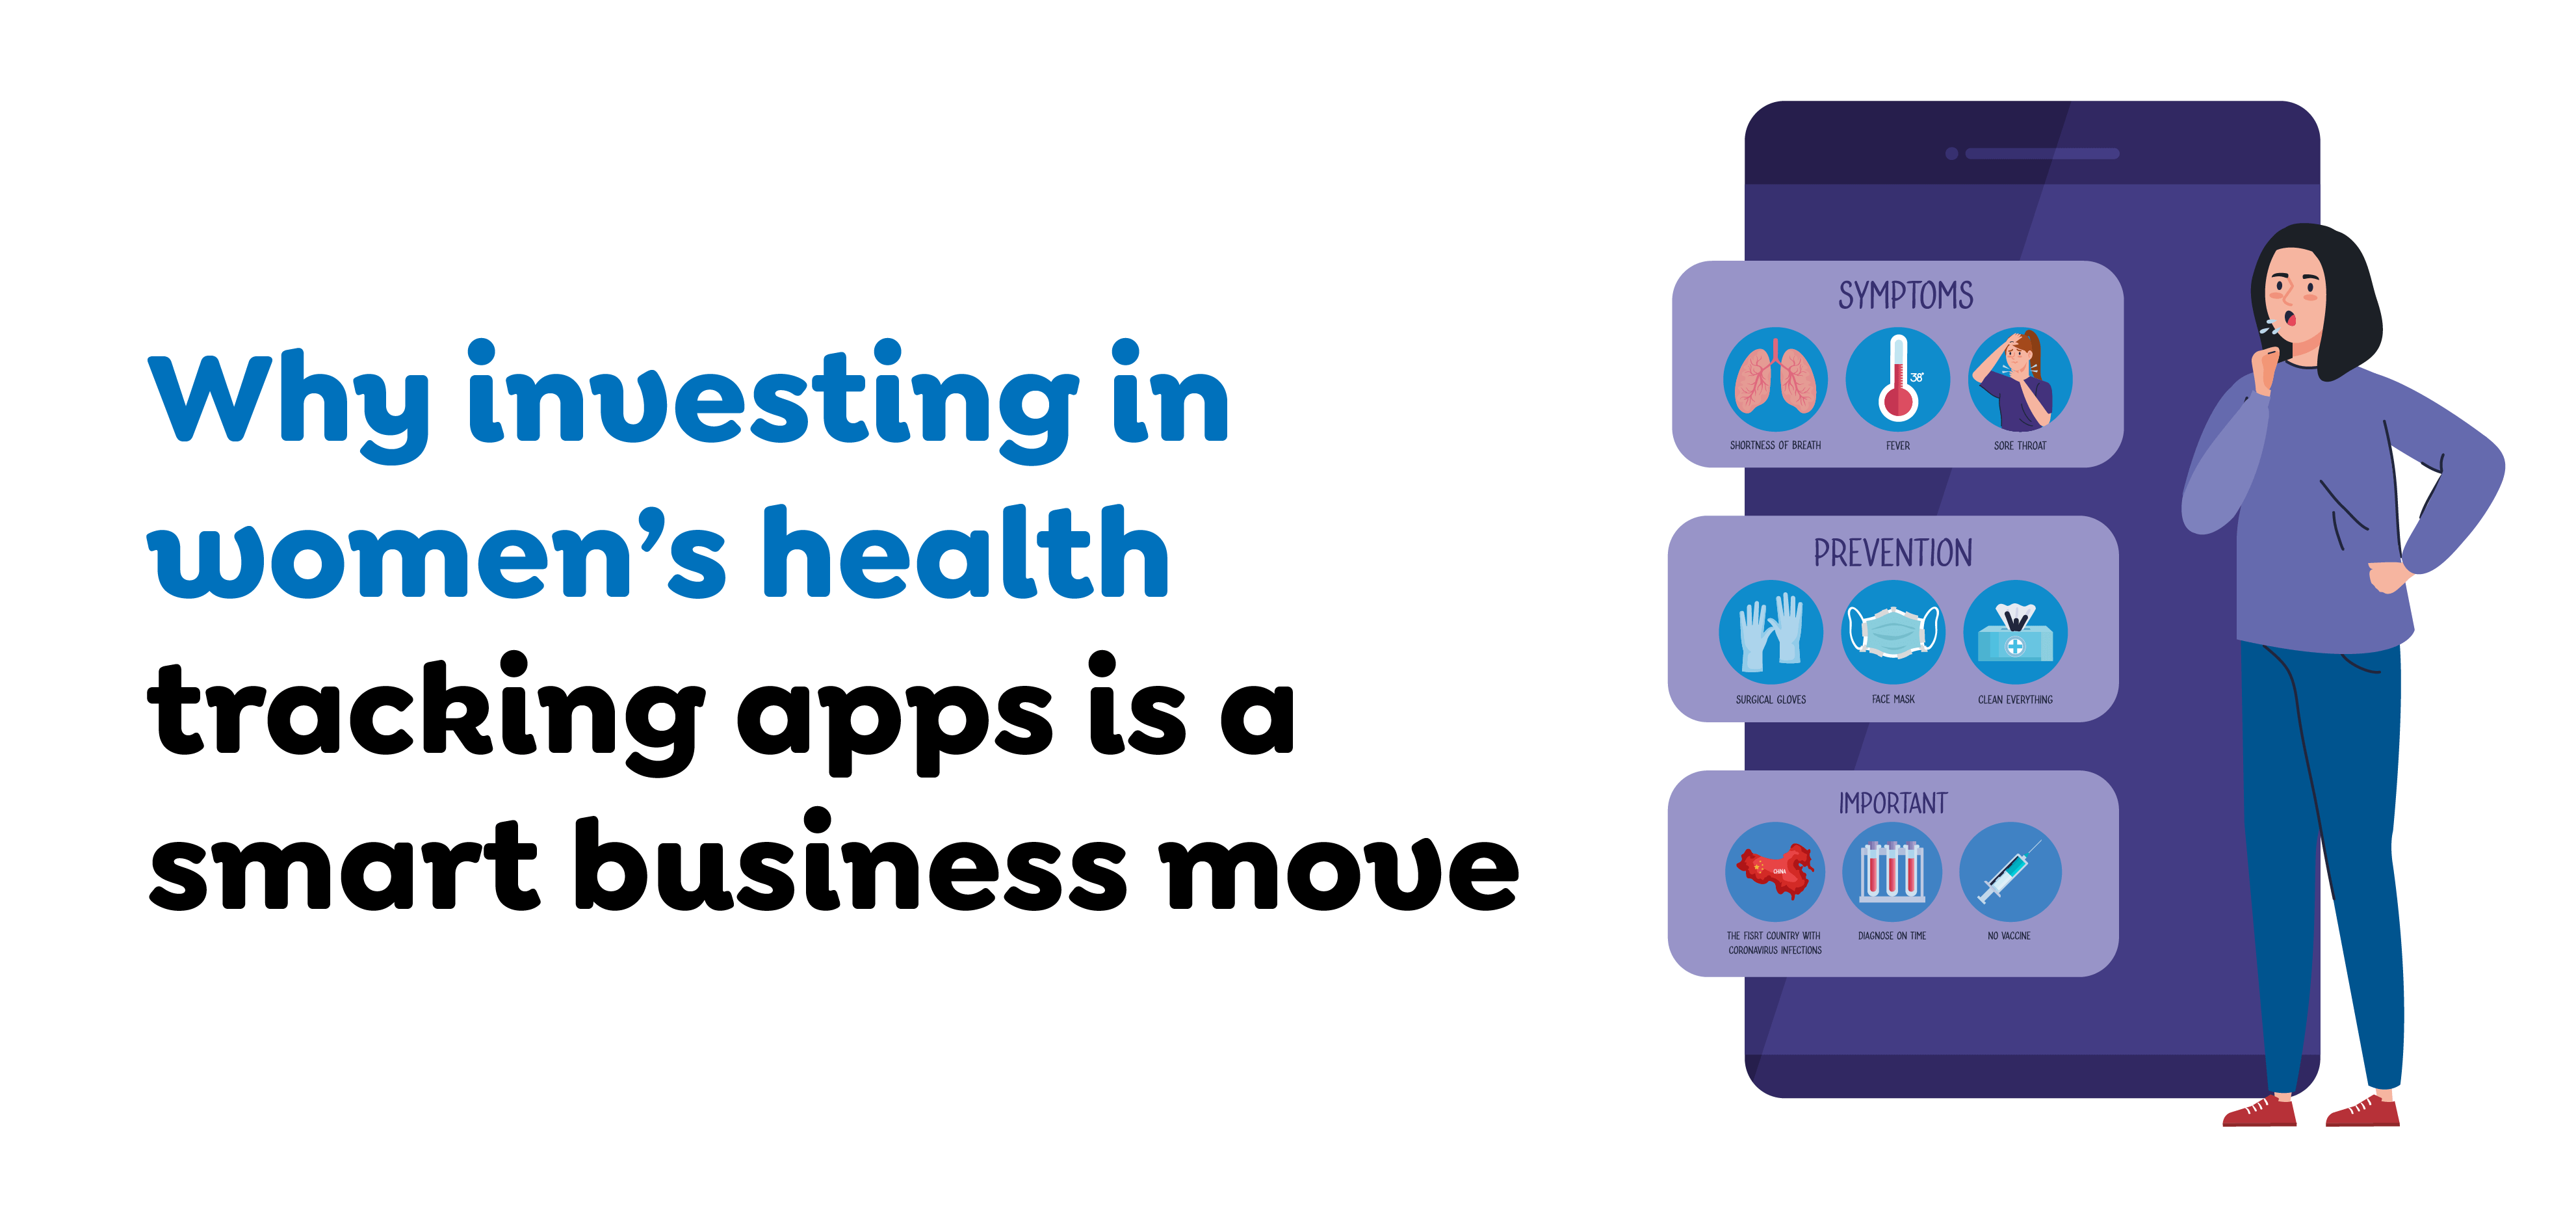 women’s health tracking apps